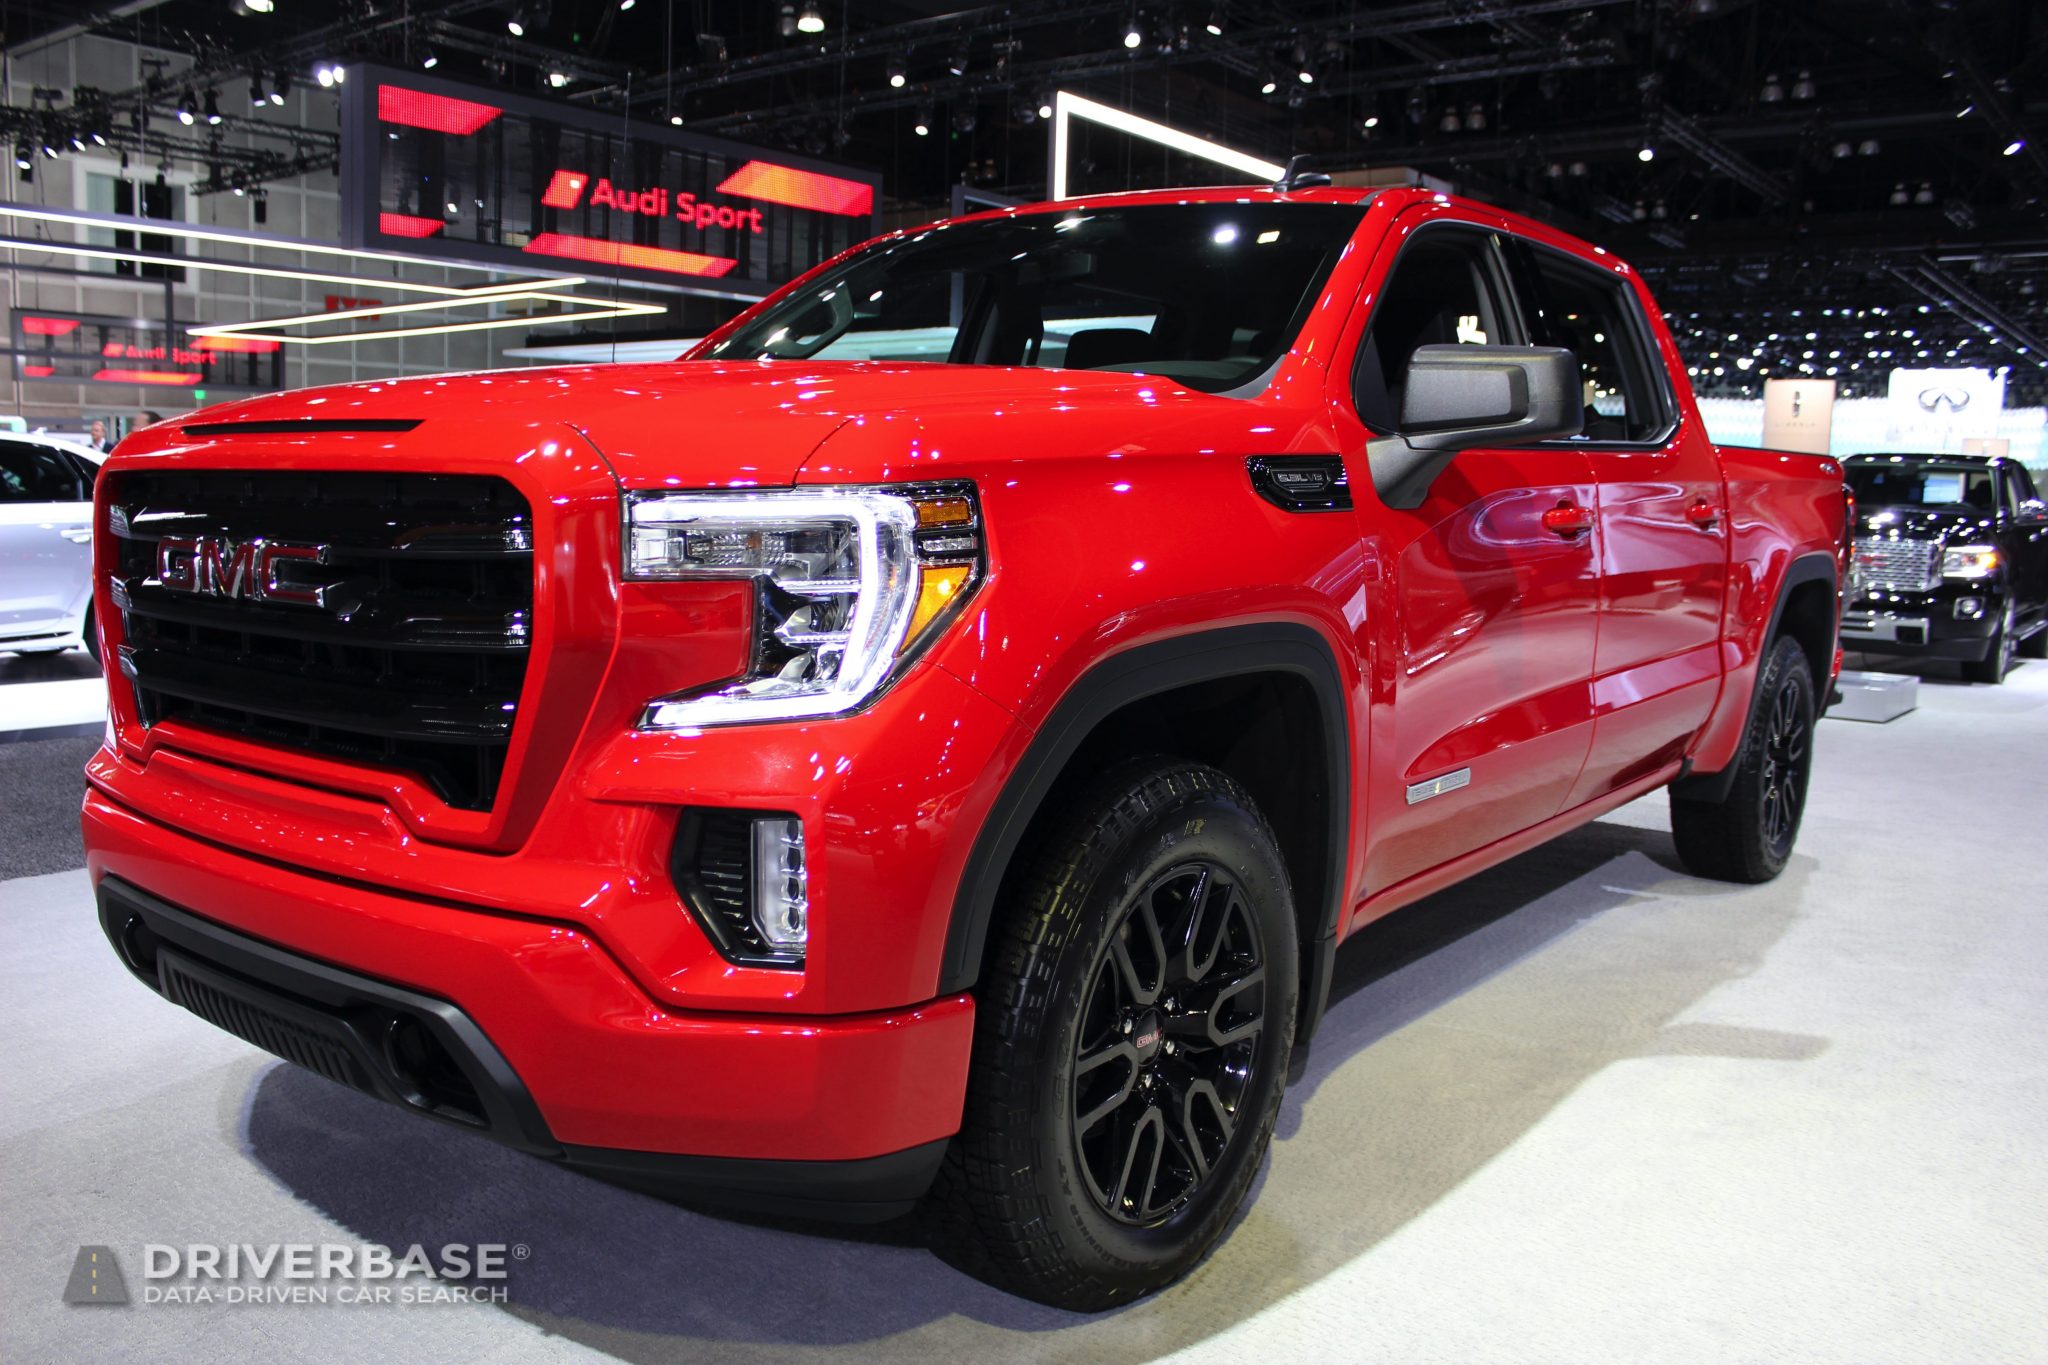 2020 GMC Sierra 1500 Elevation at the 2019 Los Angeles Auto Show